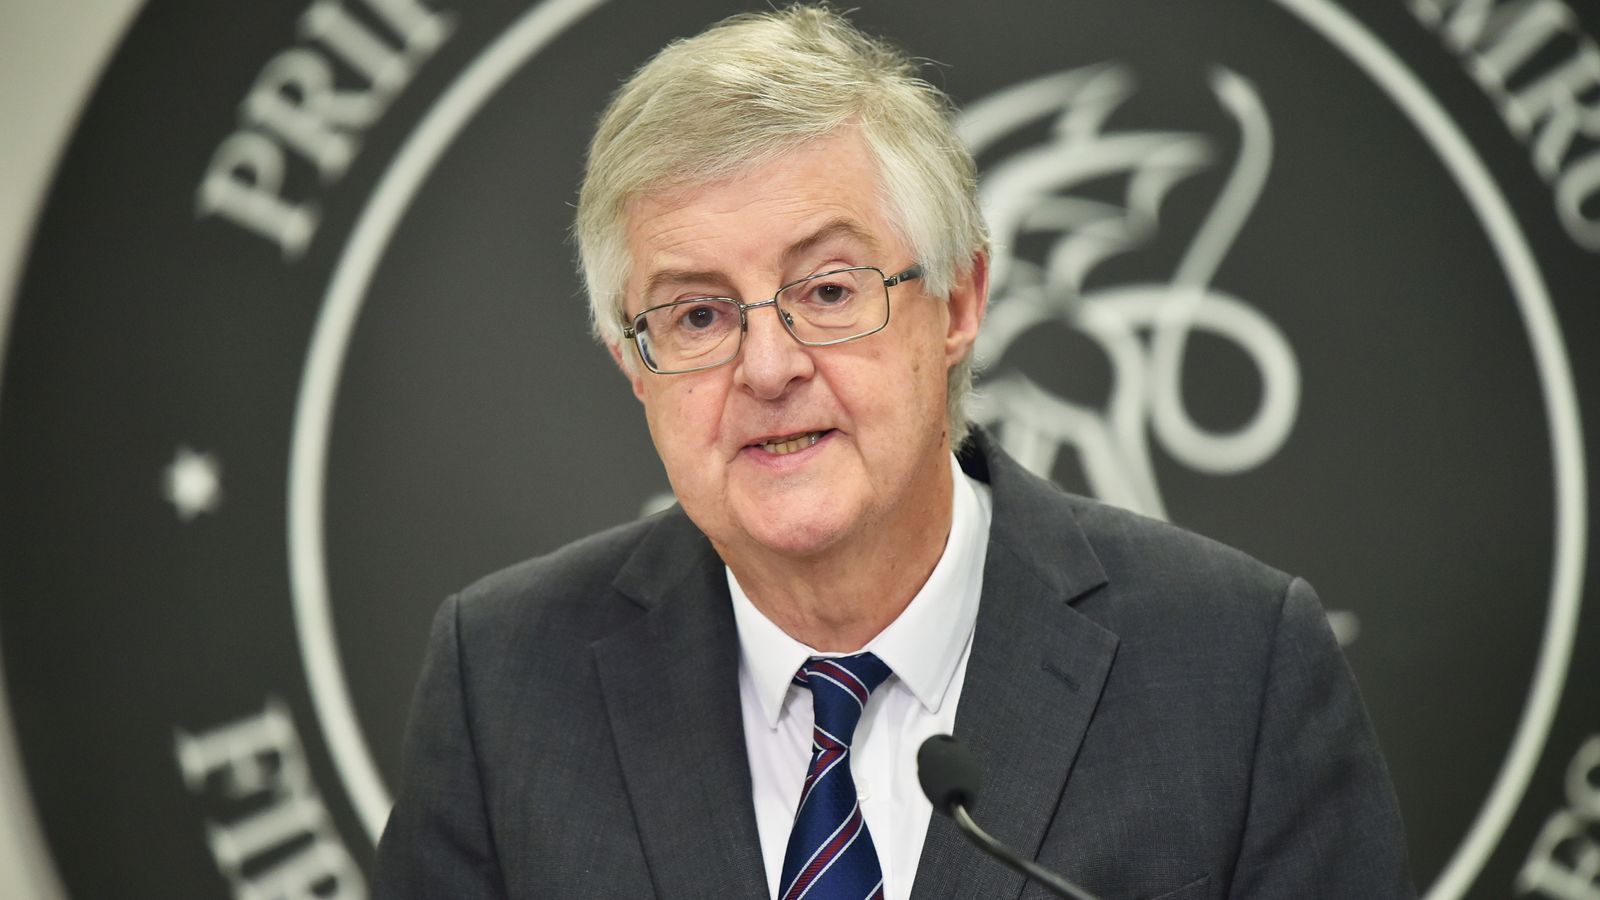 COVID-19: Wales ‘on the final lap’ of emerging from coronavirus as Mark Drakeford says nation will move to alert level zero on Saturday